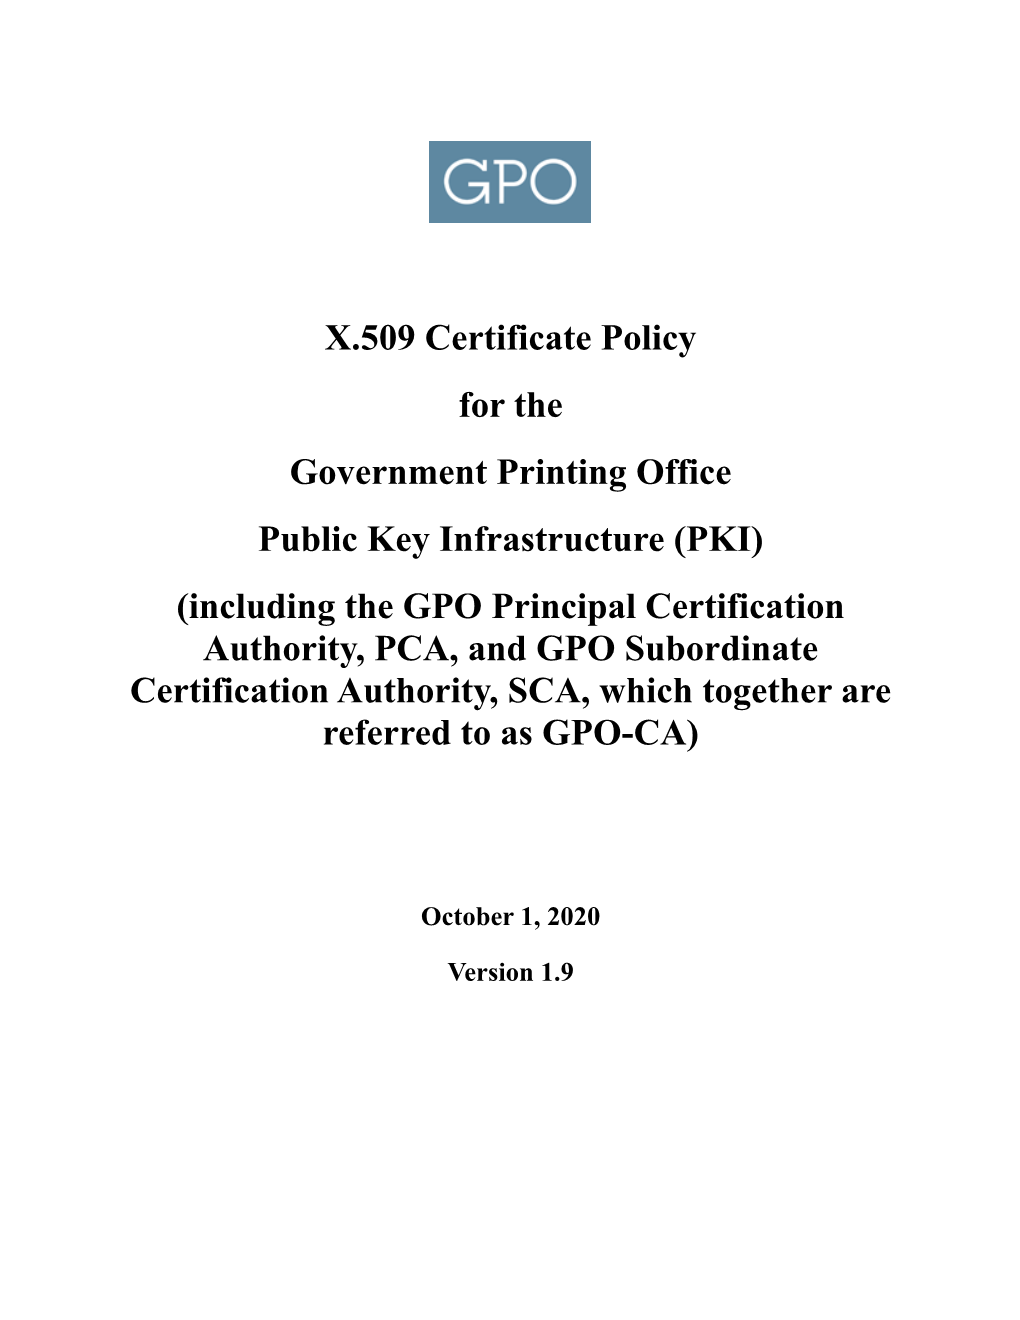 X.509 Certificate Policy for the Government Printing Office Public